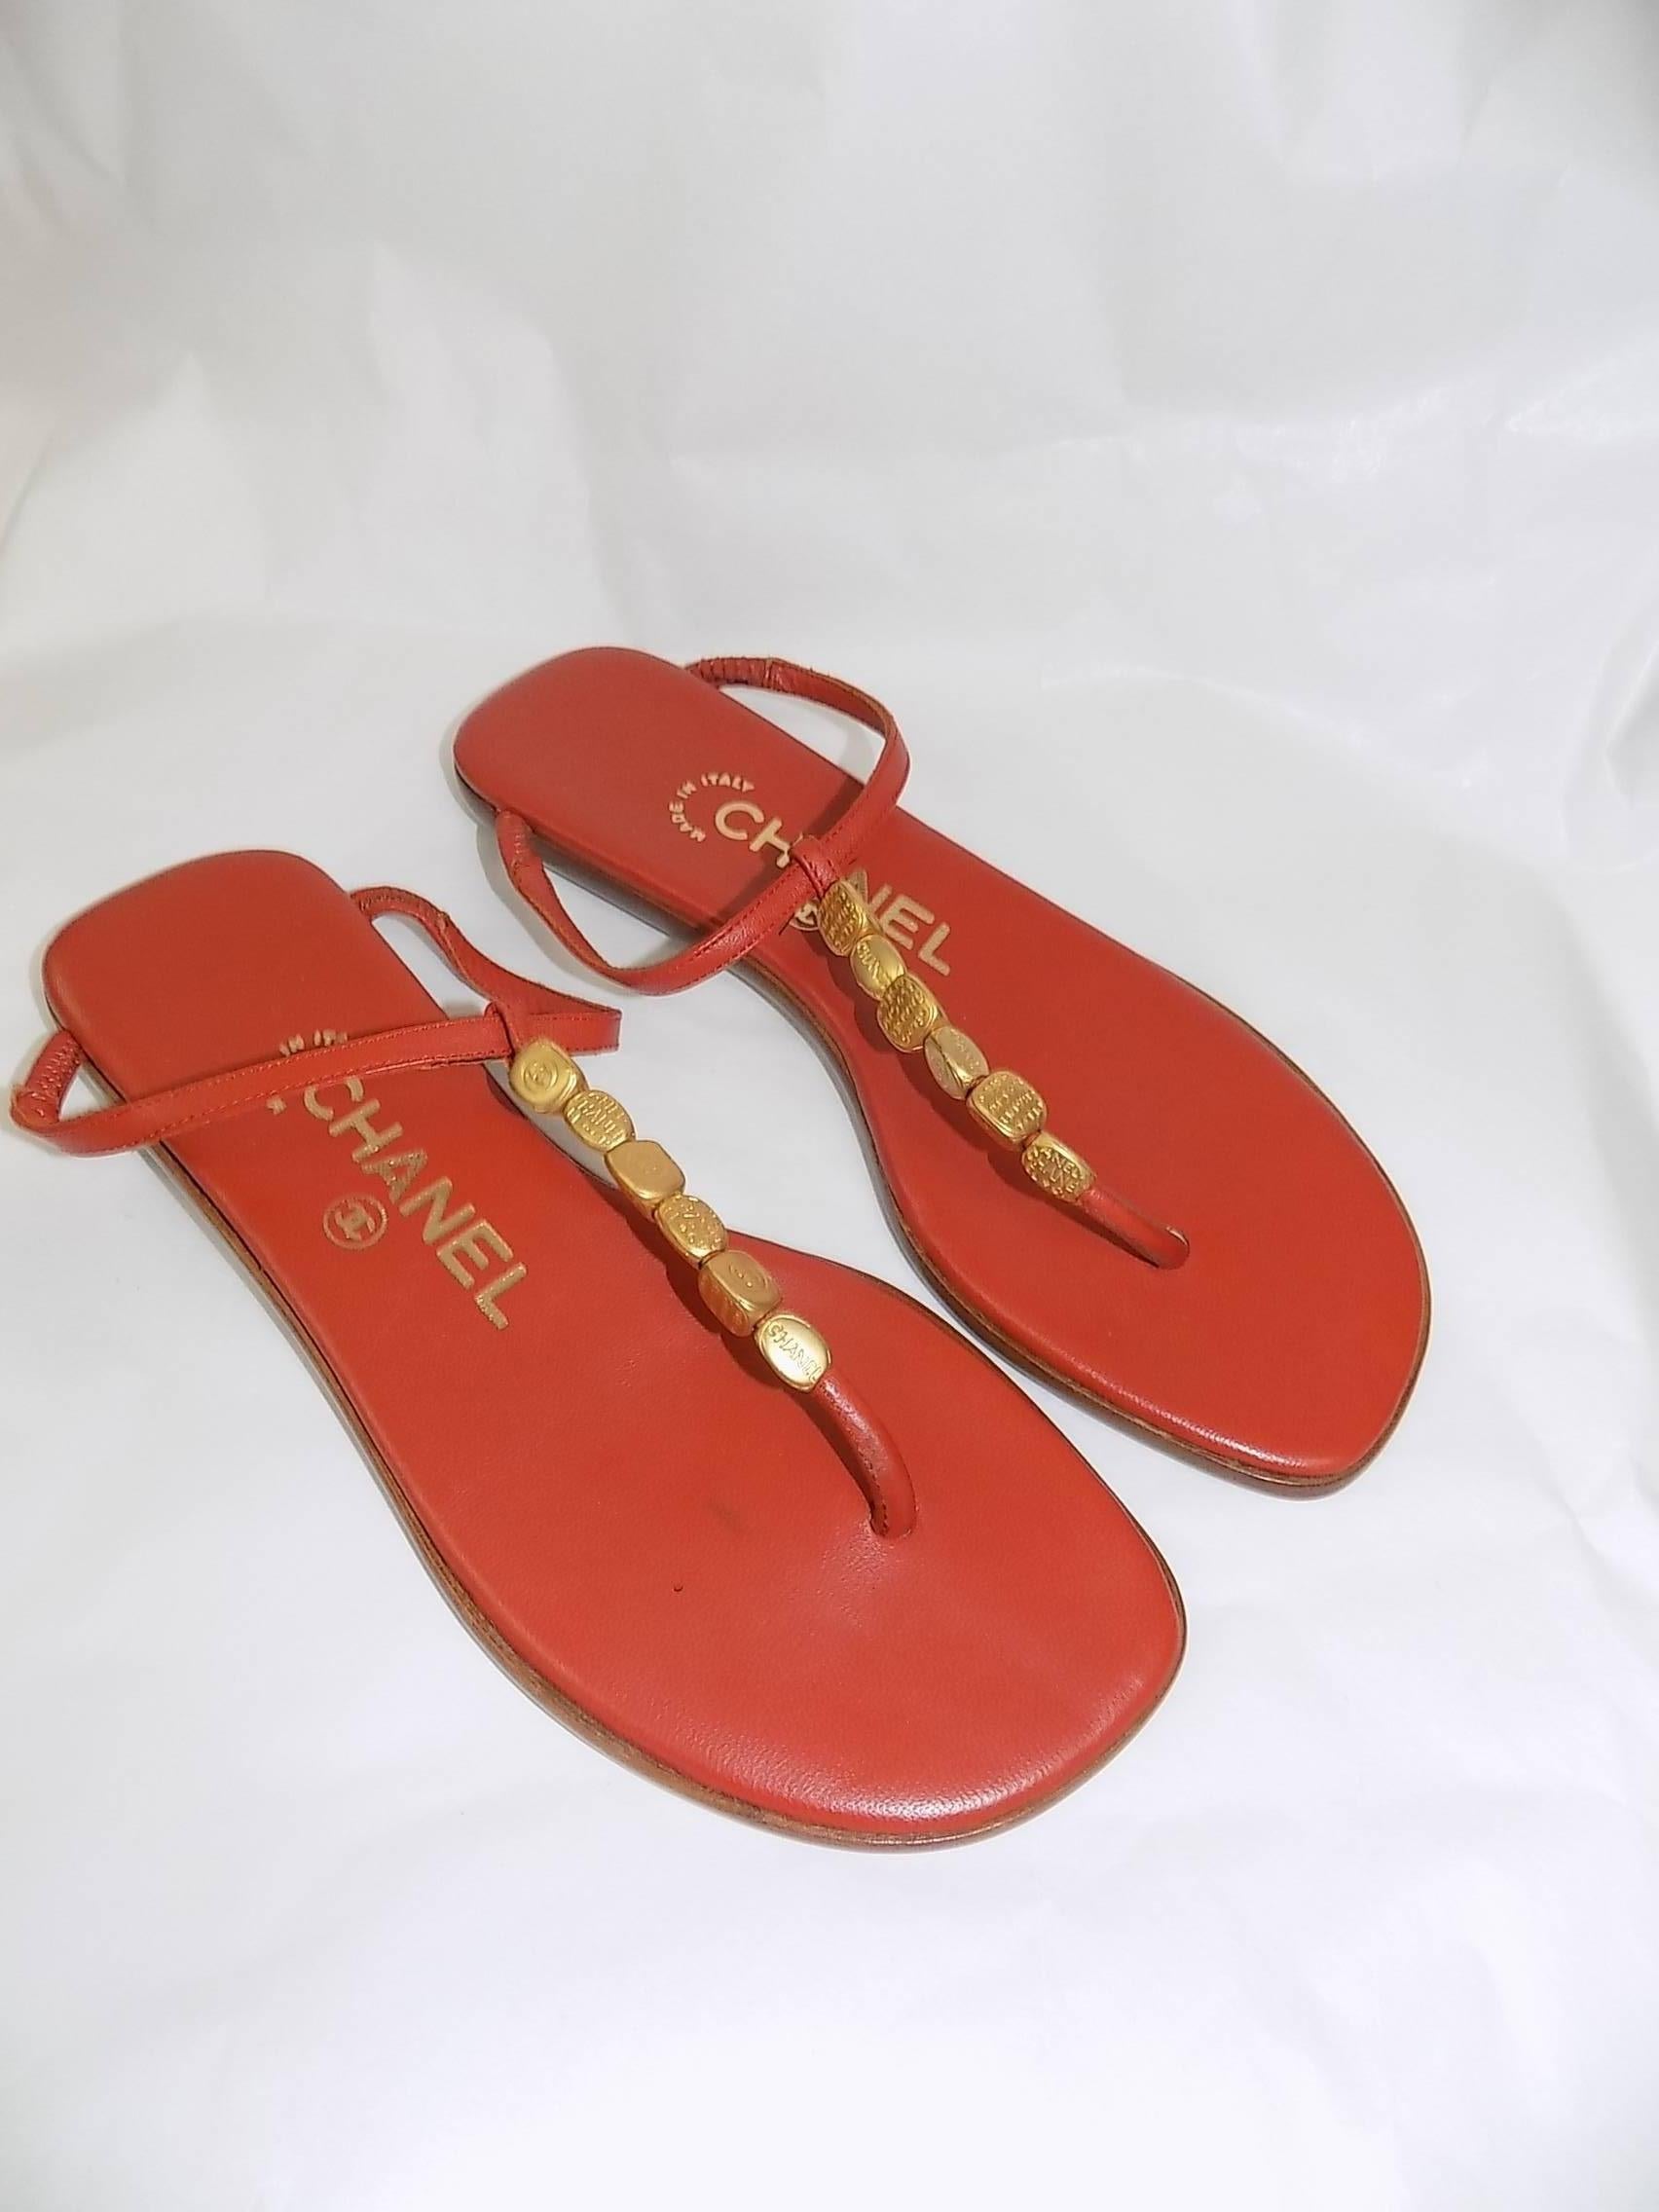 Orange Red leather Chanel thong sandals with gold-tone logo bead embellishments 35